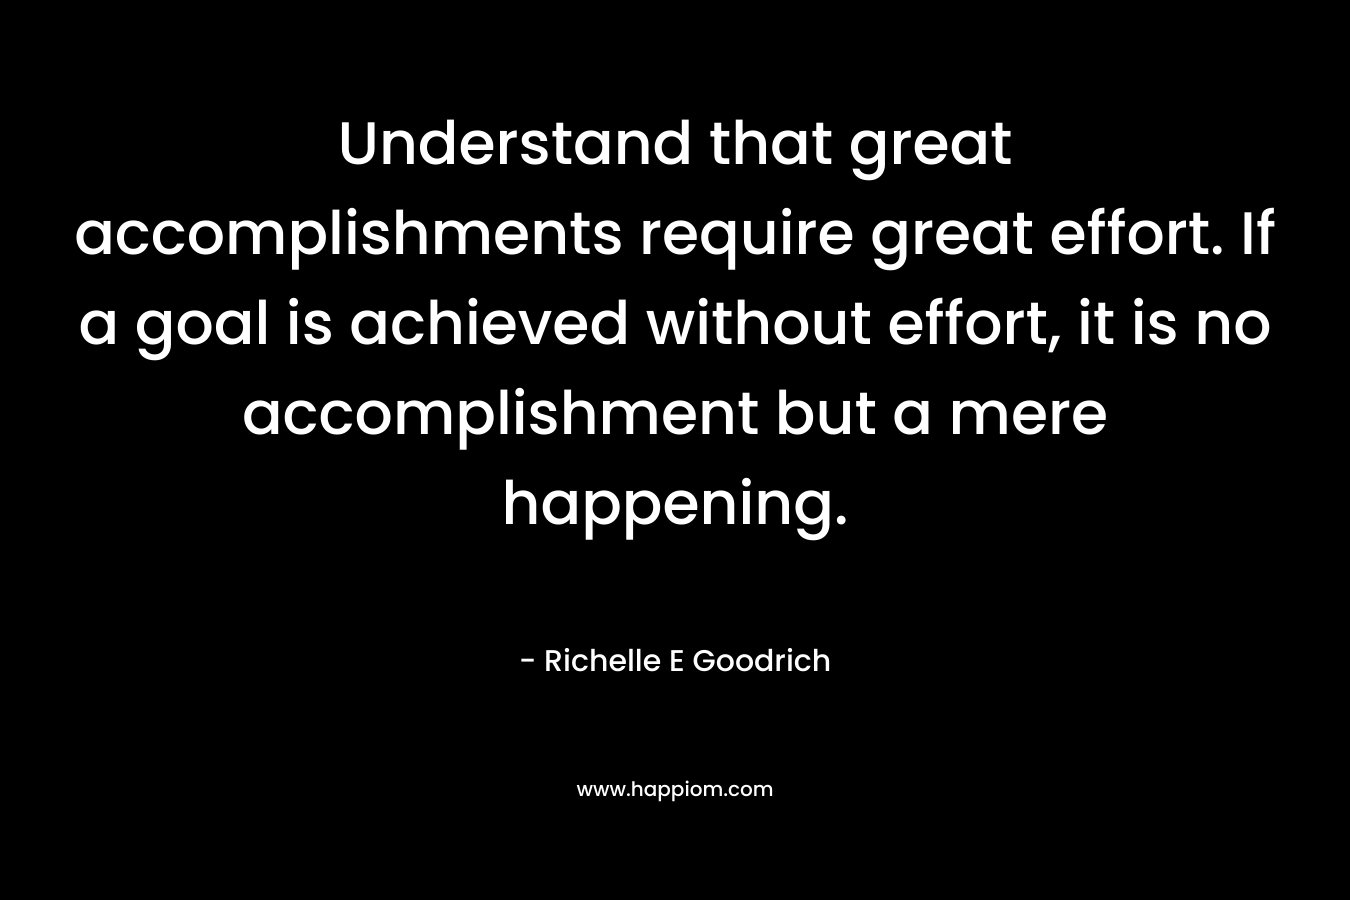 Understand that great accomplishments require great effort. If a goal is achieved without effort, it is no accomplishment but a mere happening. – Richelle E Goodrich